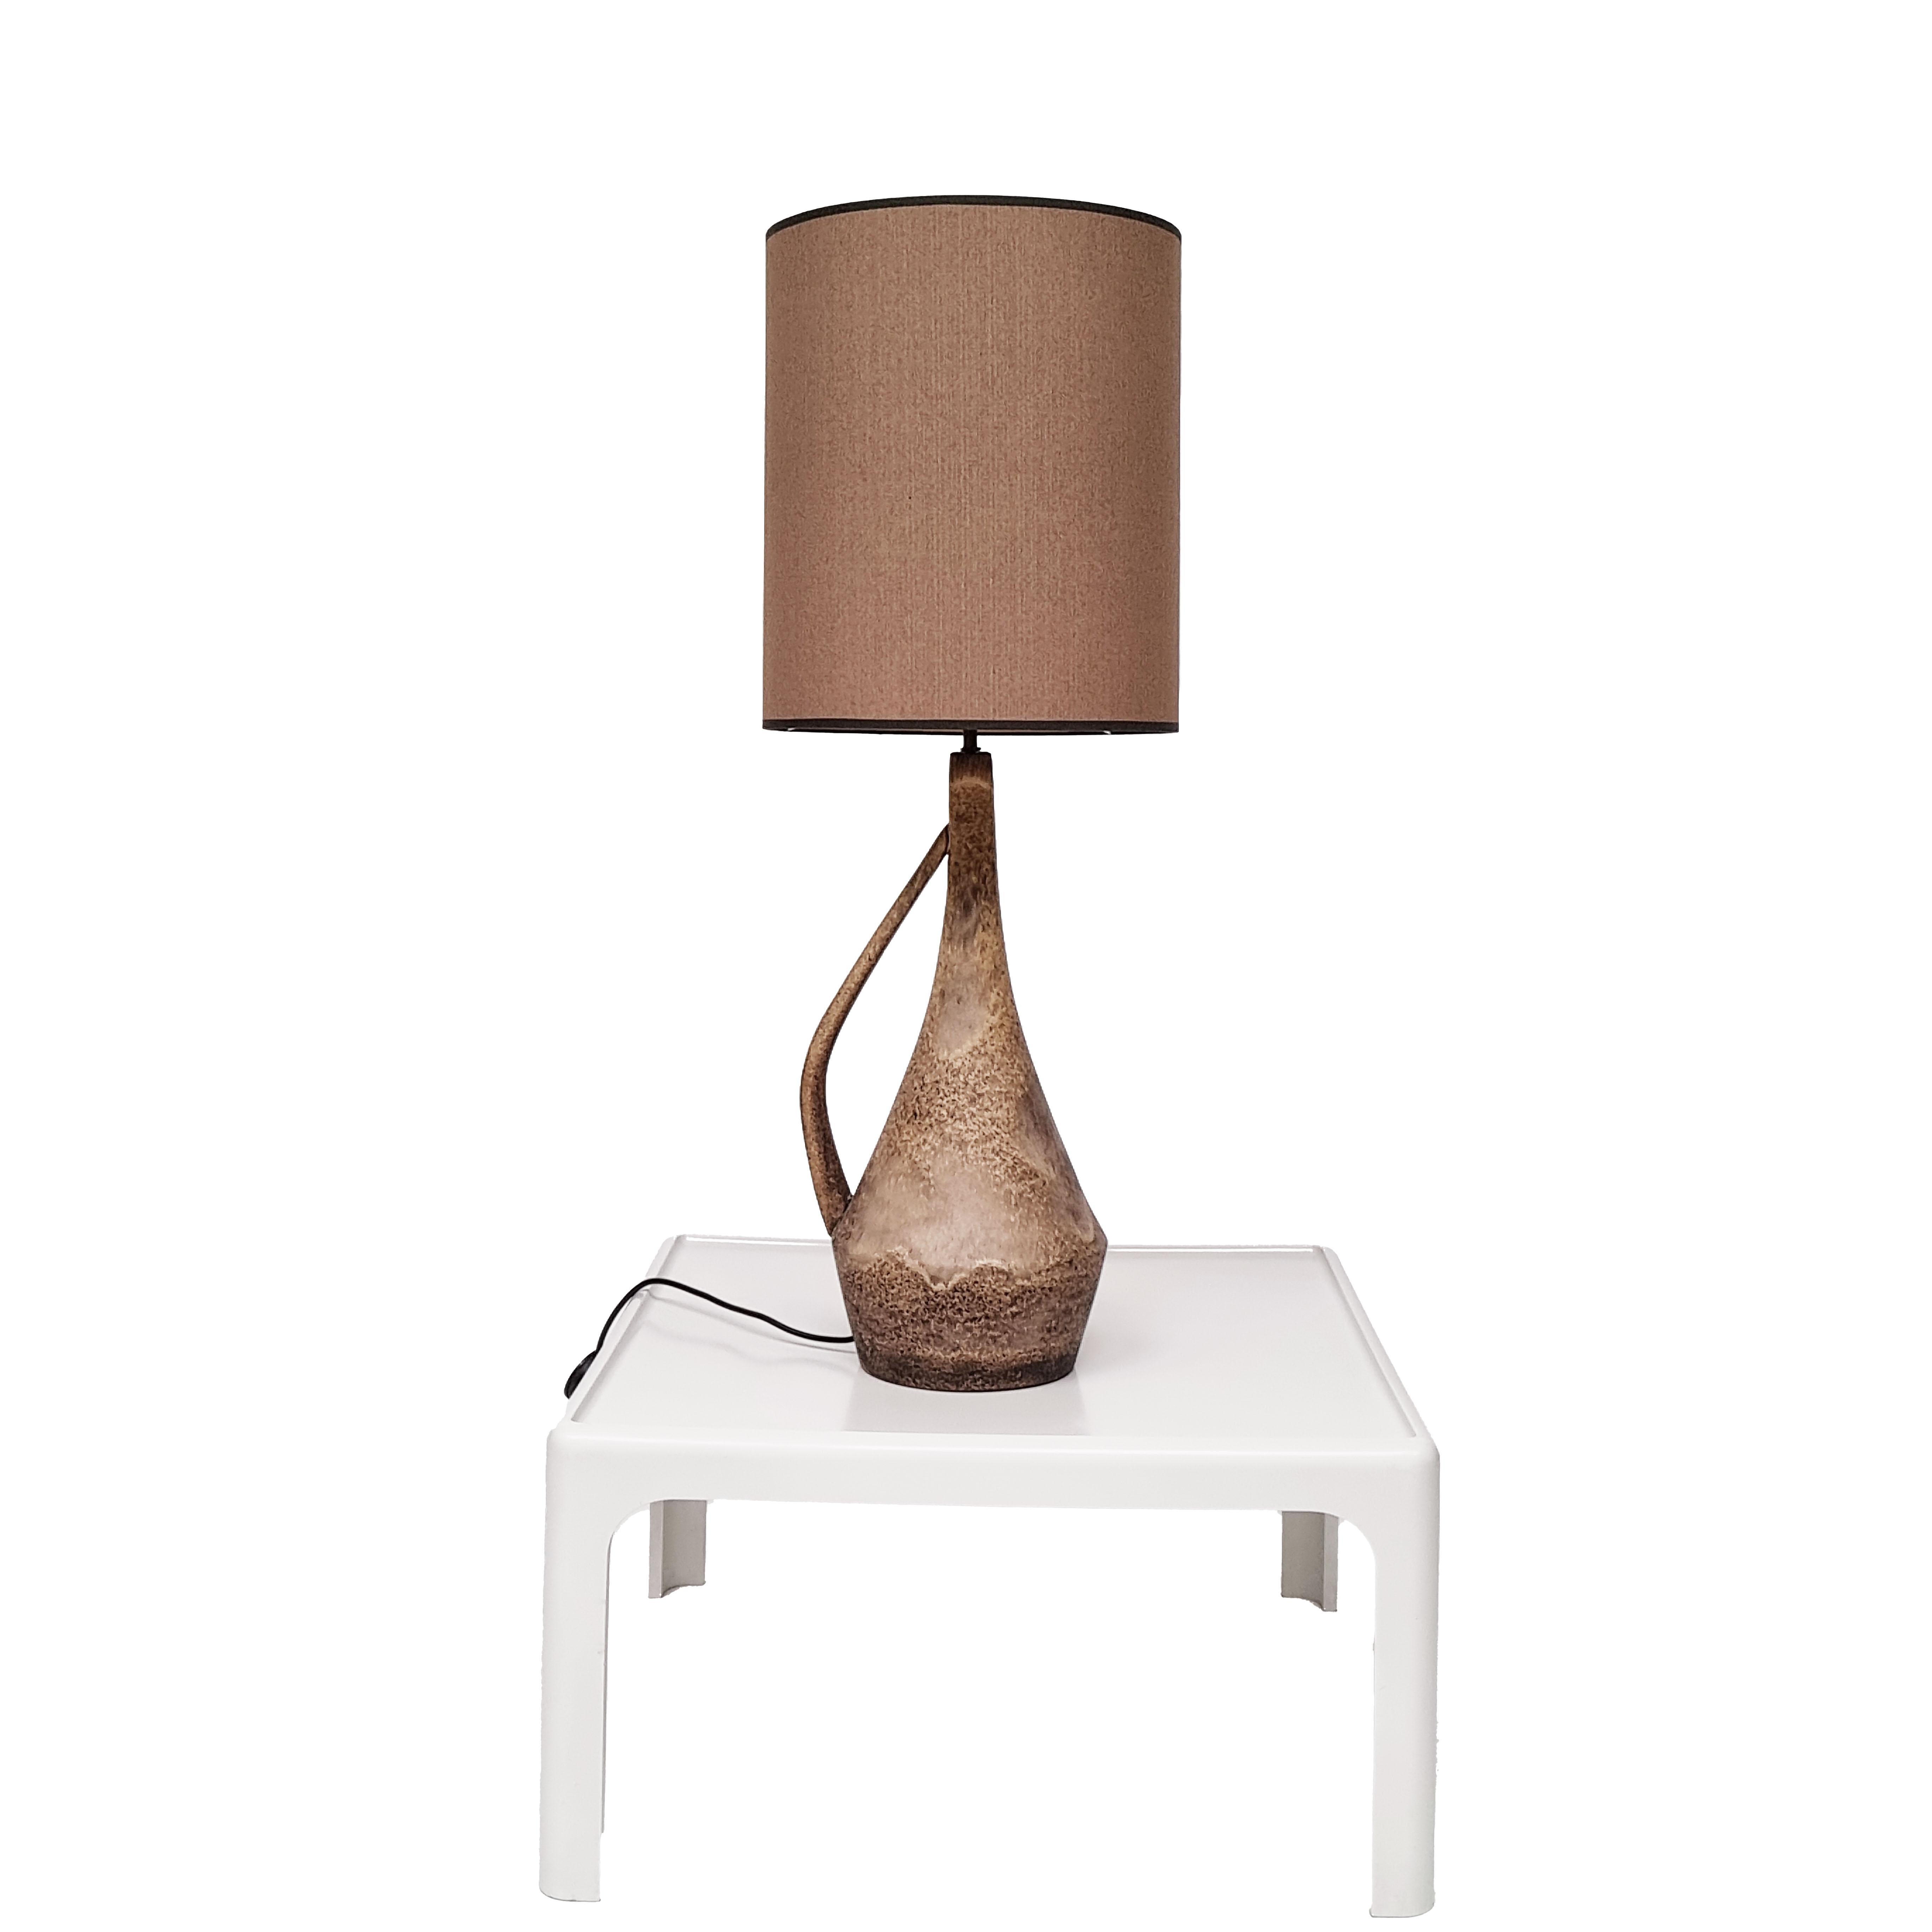 A sizable, handcrafted ceramic table lamp from midcentury France, following the Brutalist style that highlights the inherent, unrefined qualities of clay while maintaining a uniquely exquisite shape.  This table lamp comes with the depicted